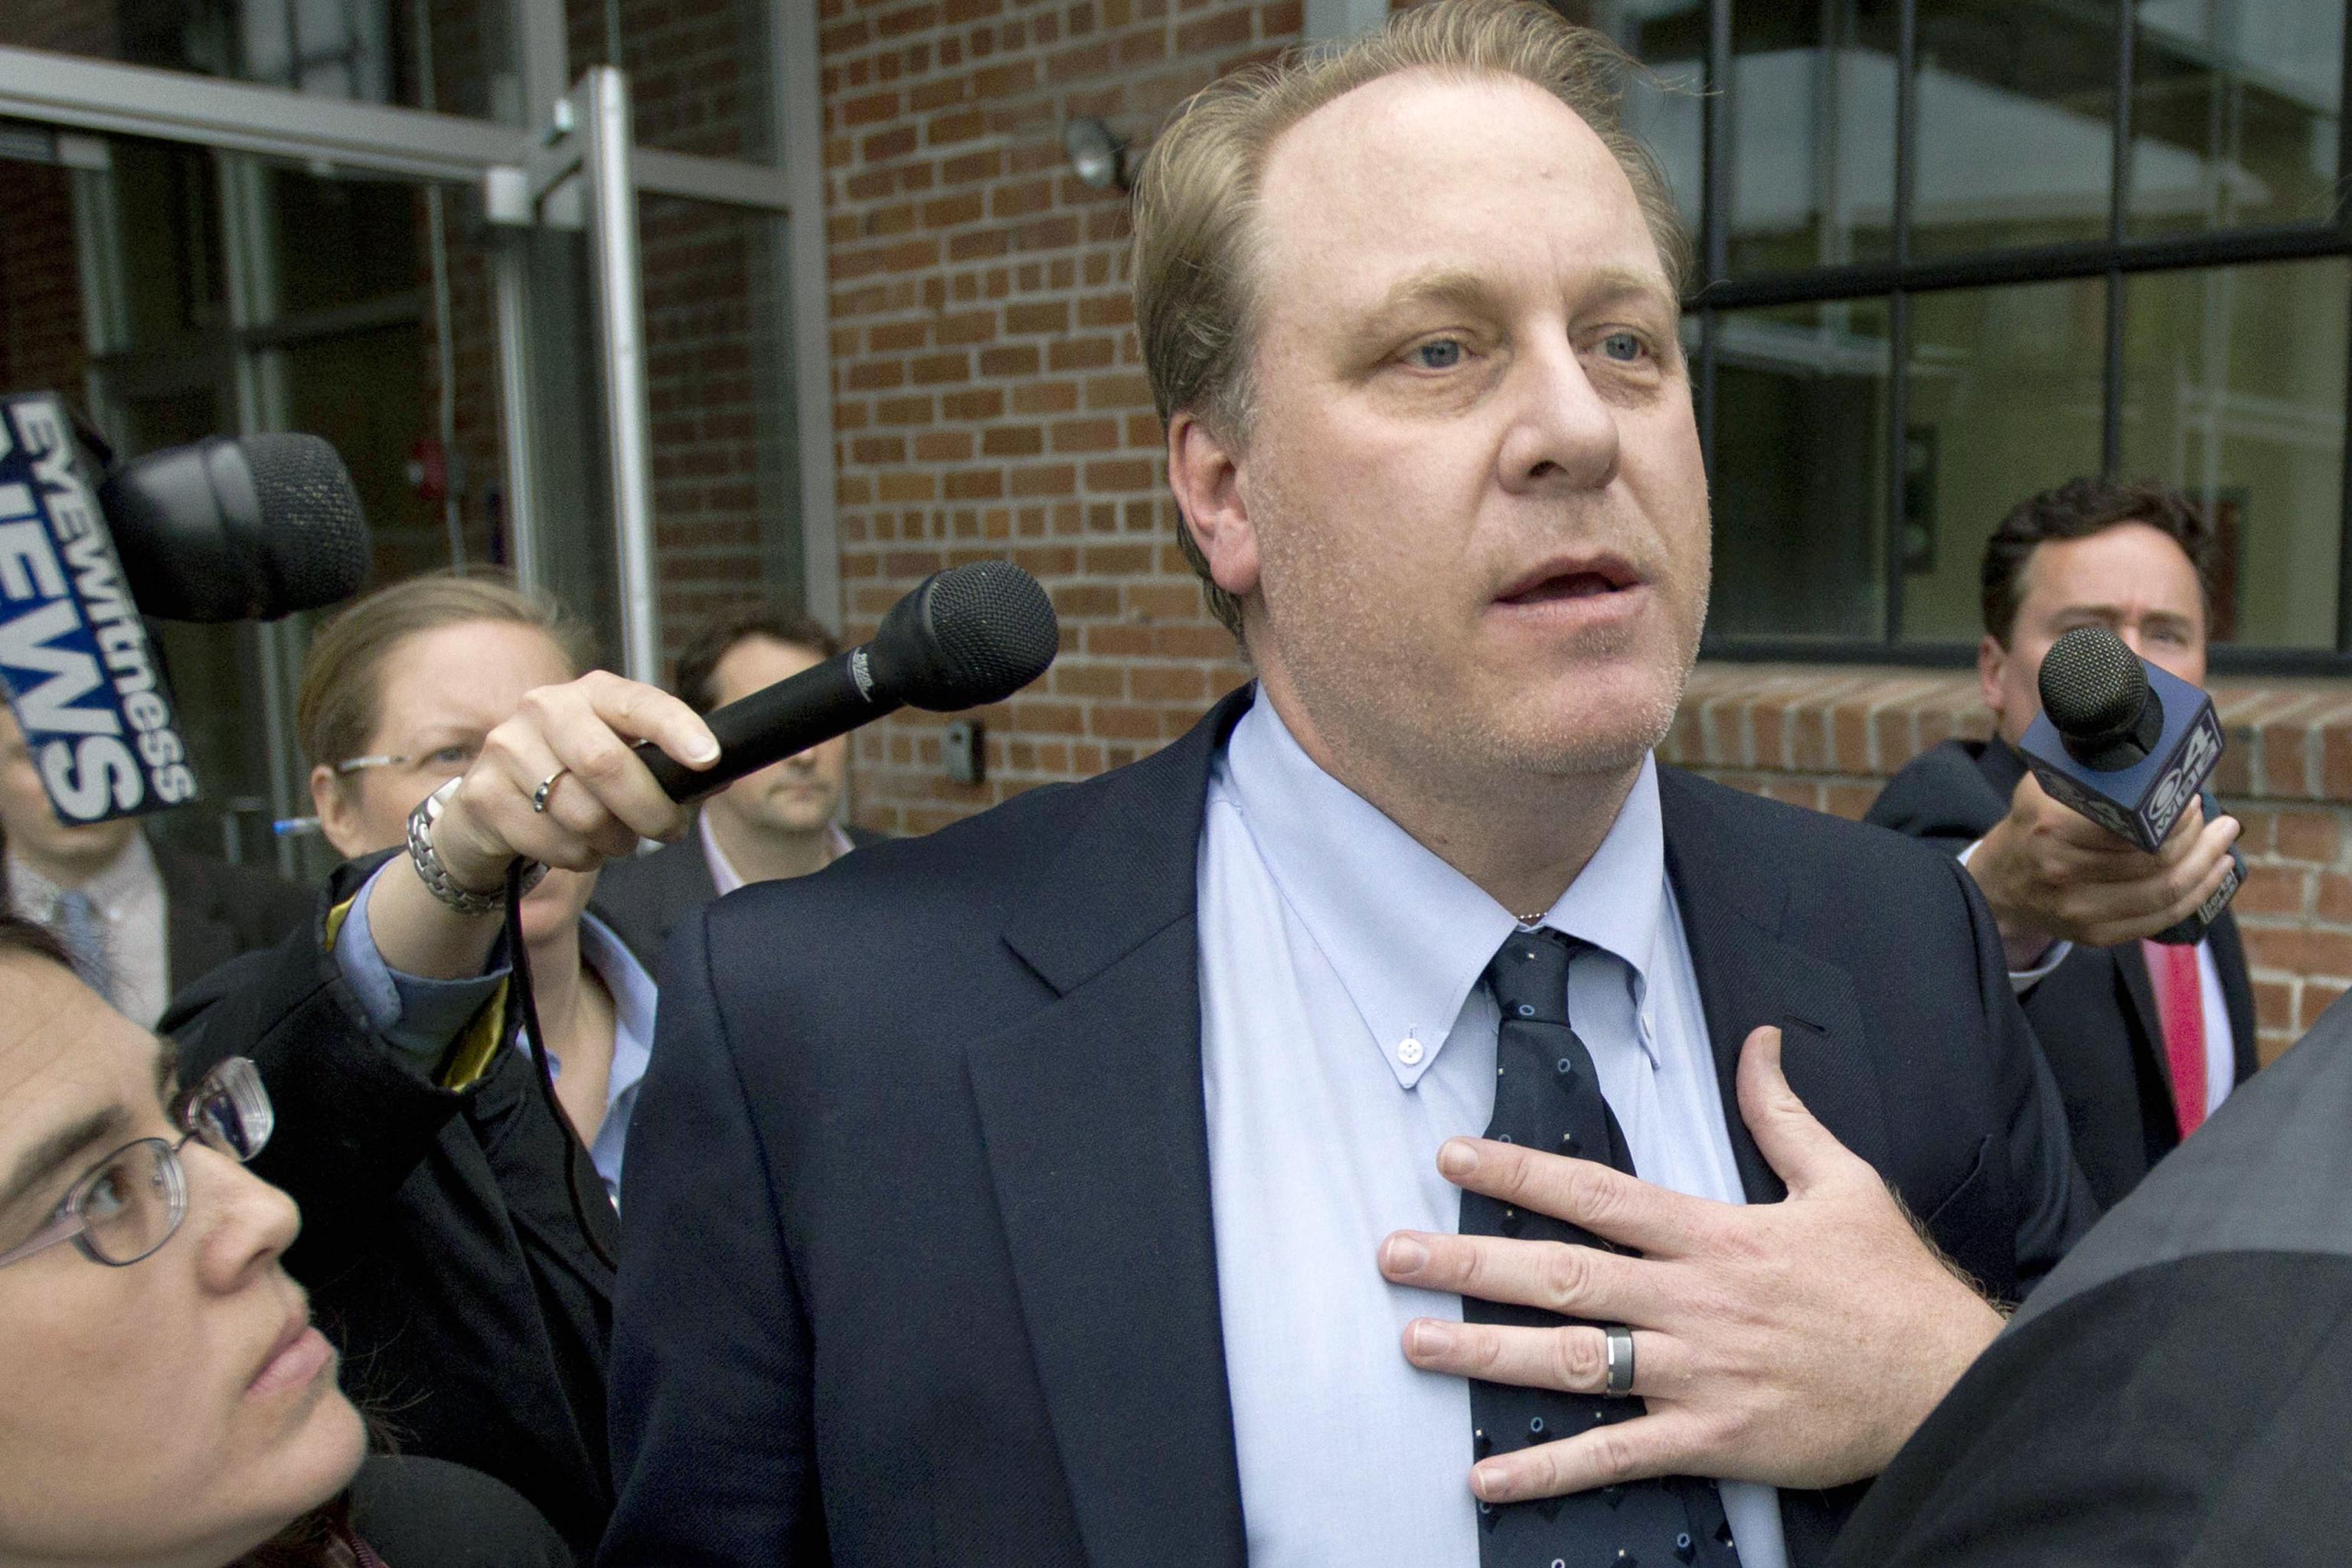 ESPN fires Curt Schilling after latest controversy — a transphobic